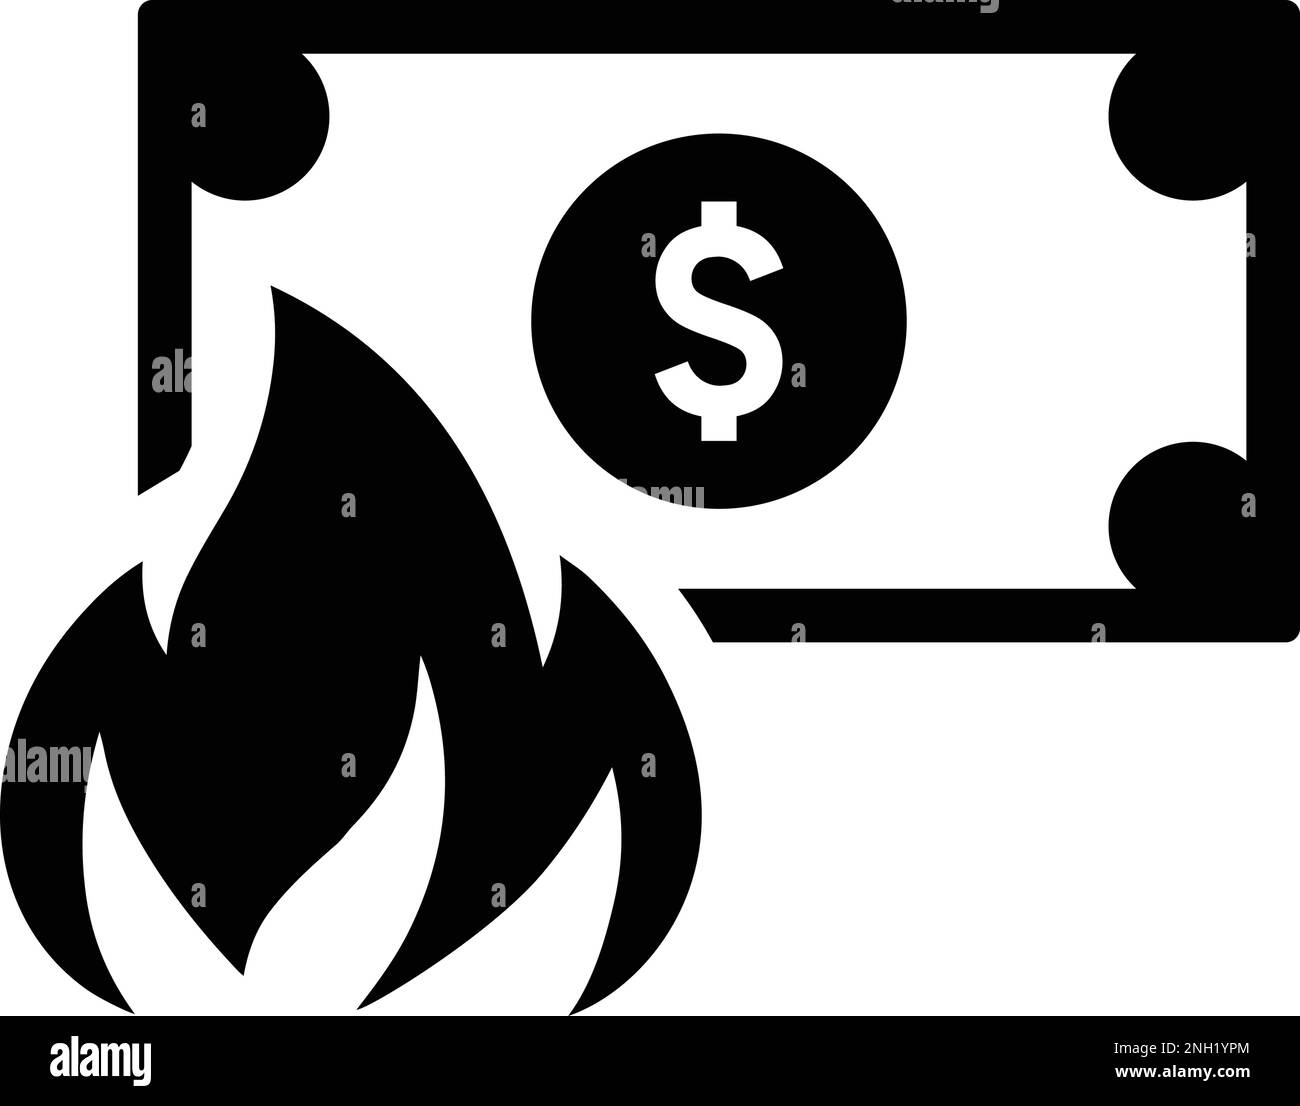 Money Burning icon. Fully editable vector EPS use for printed materials and infographics, web or any kind of design project. Stock Vector